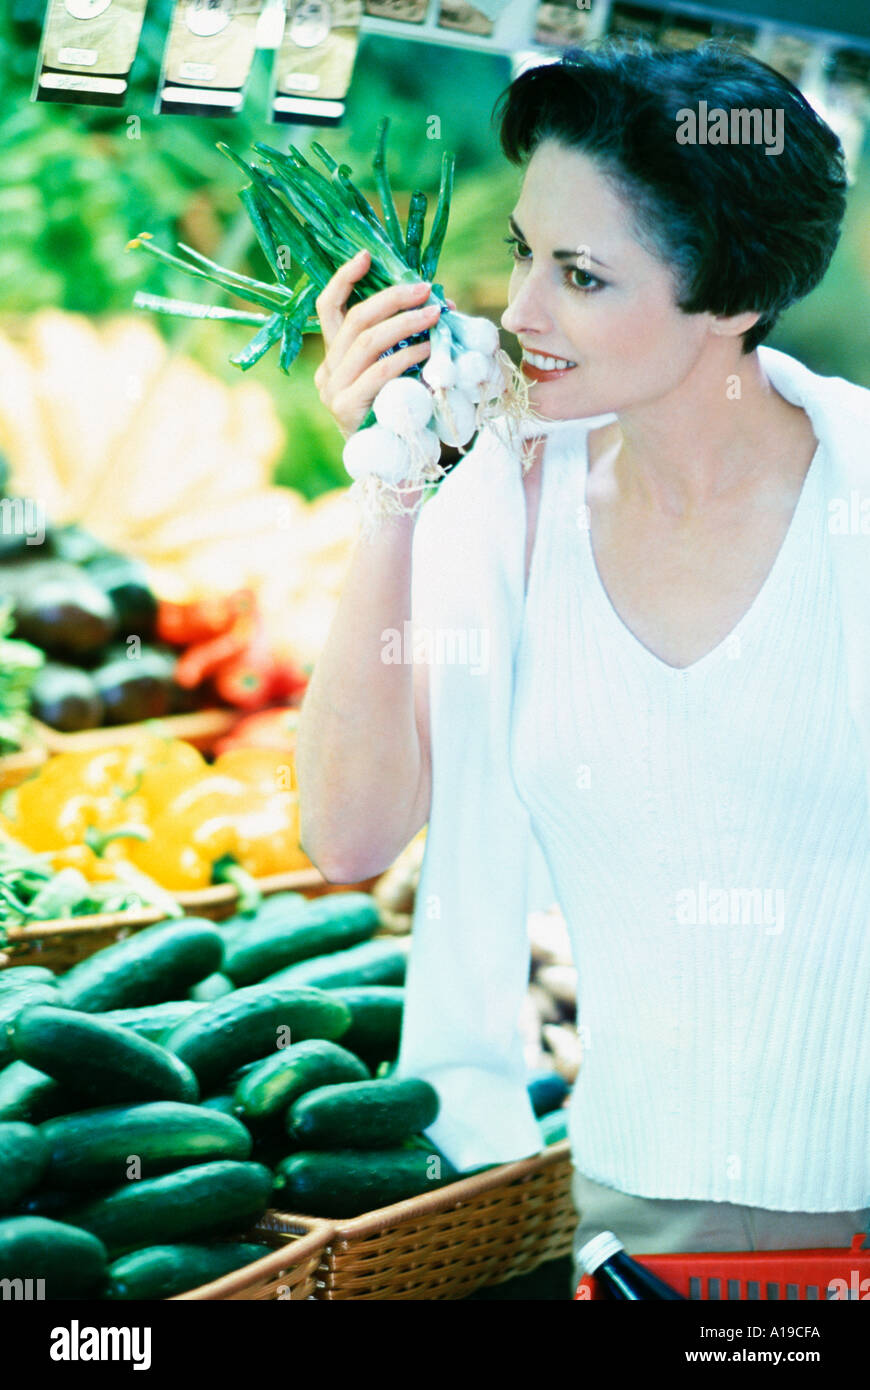 Woman shopping for produce in grocery market Stock Photo